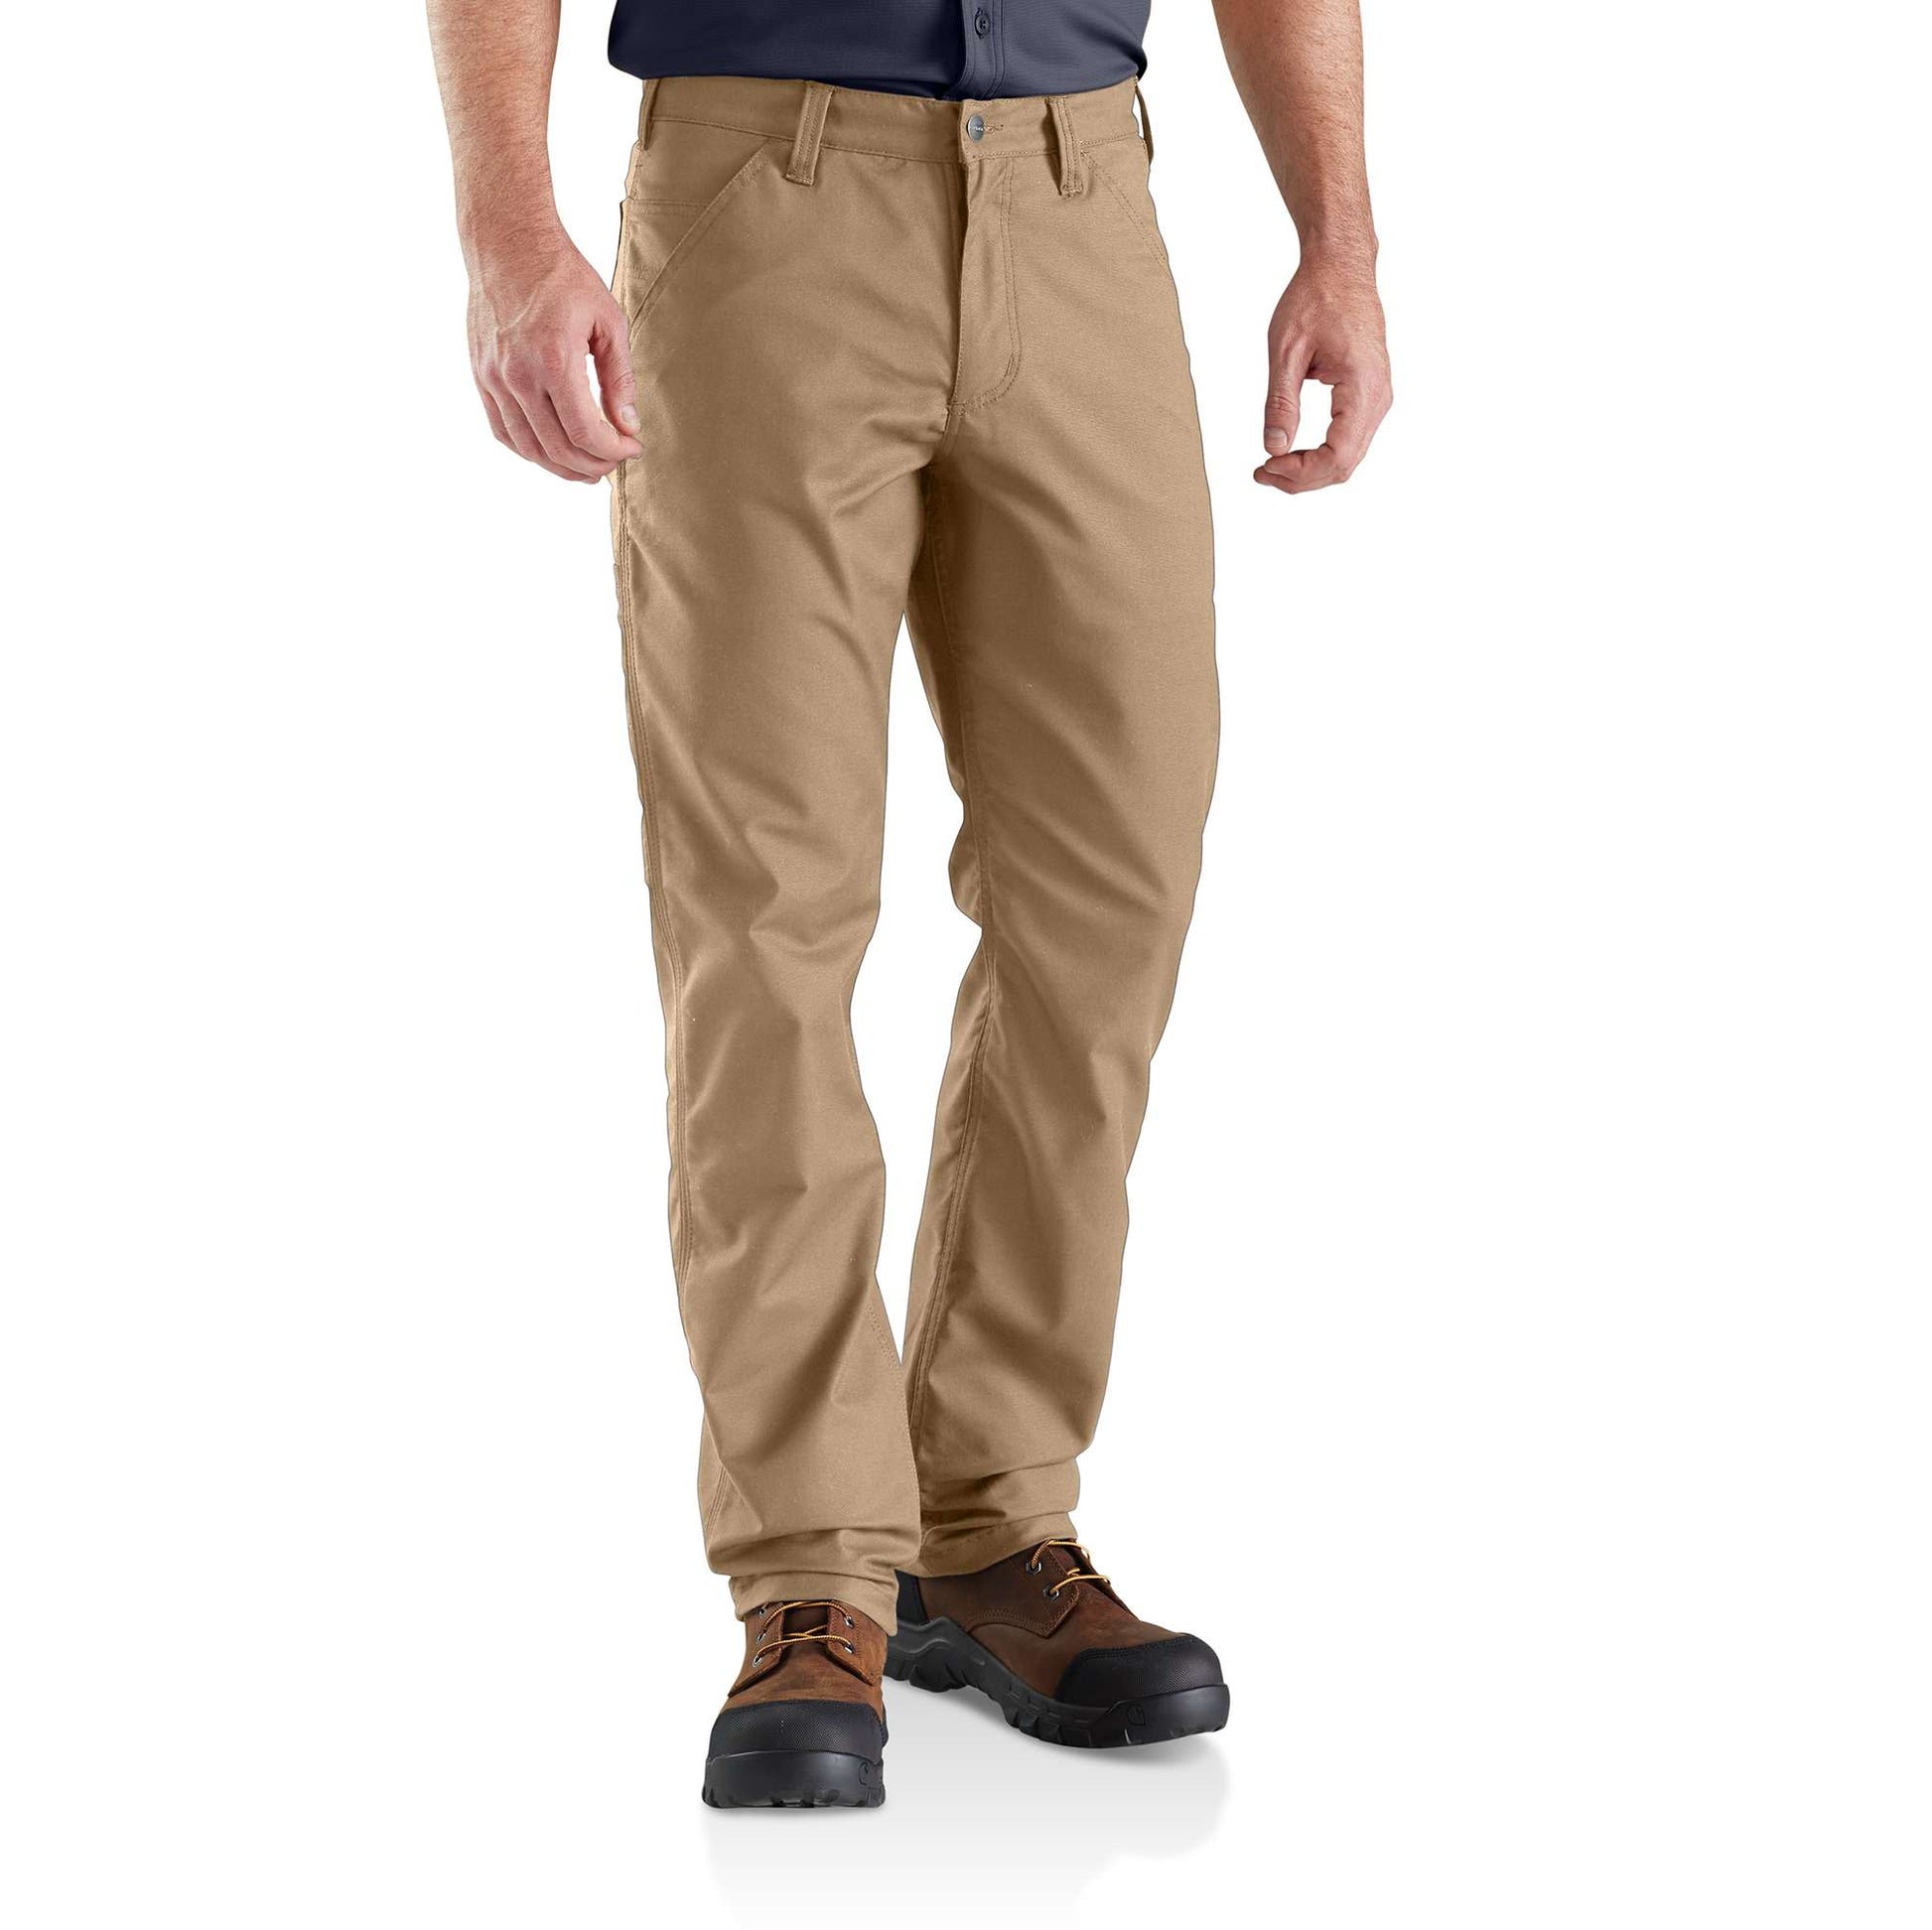 Carhartt Men's Rugged Flex Relaxed Fit Canvas 5 Pocket Work Pant